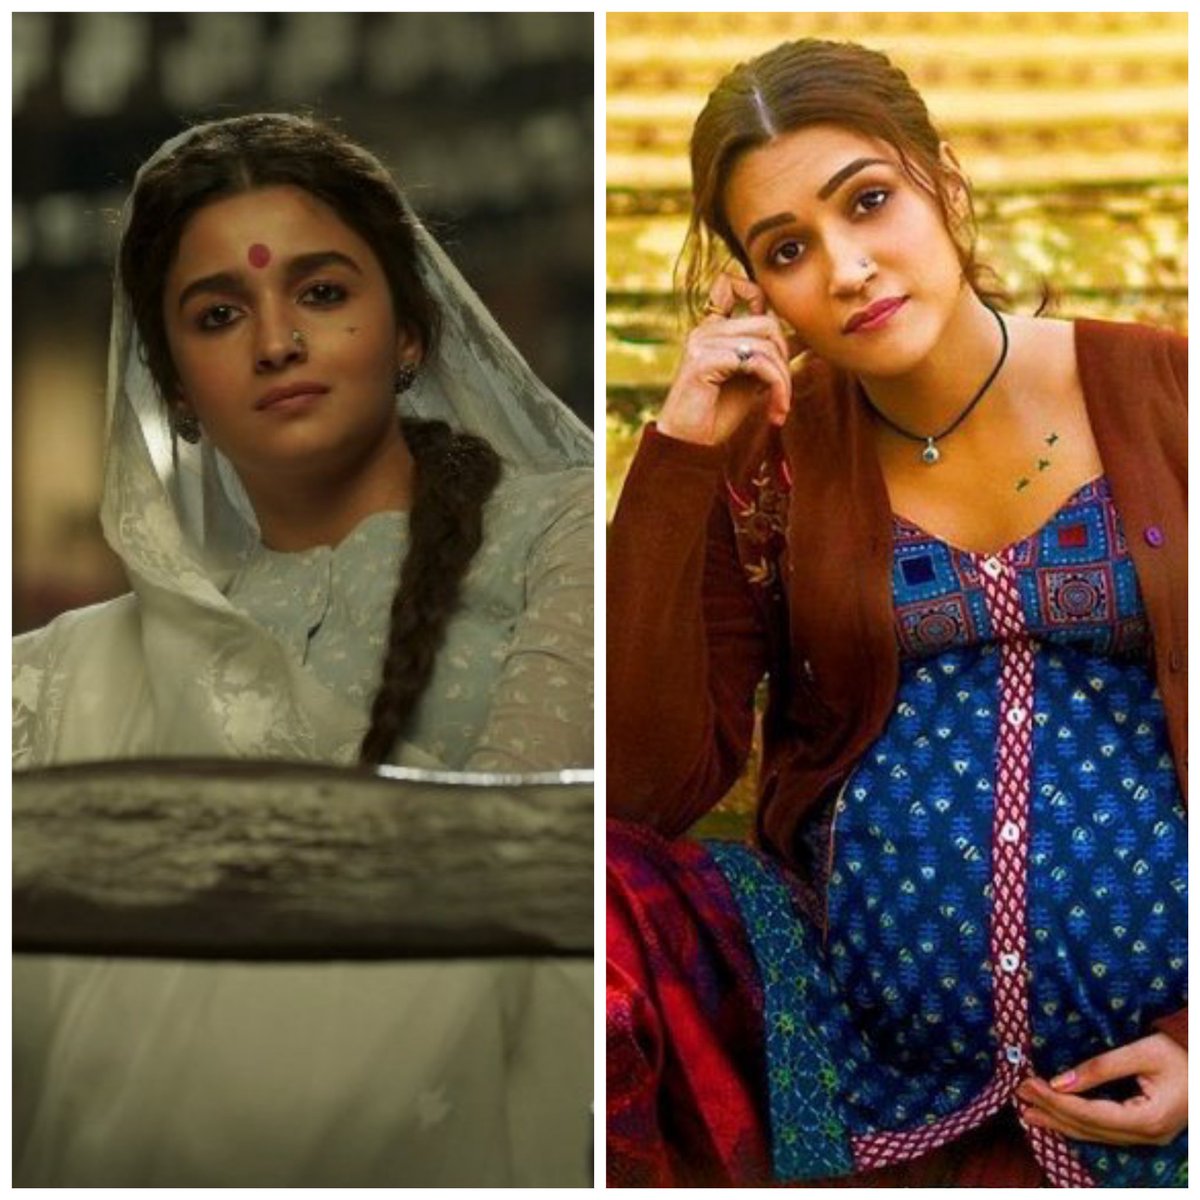 #AliaBhatt and #kritisanon share the Best Actress award at the 69th National Awards for their stunning performance in Gangubai Kathiawadi and Mimi respectively. #nationalawards2023 #Bollywood #SharmilaShowhouse